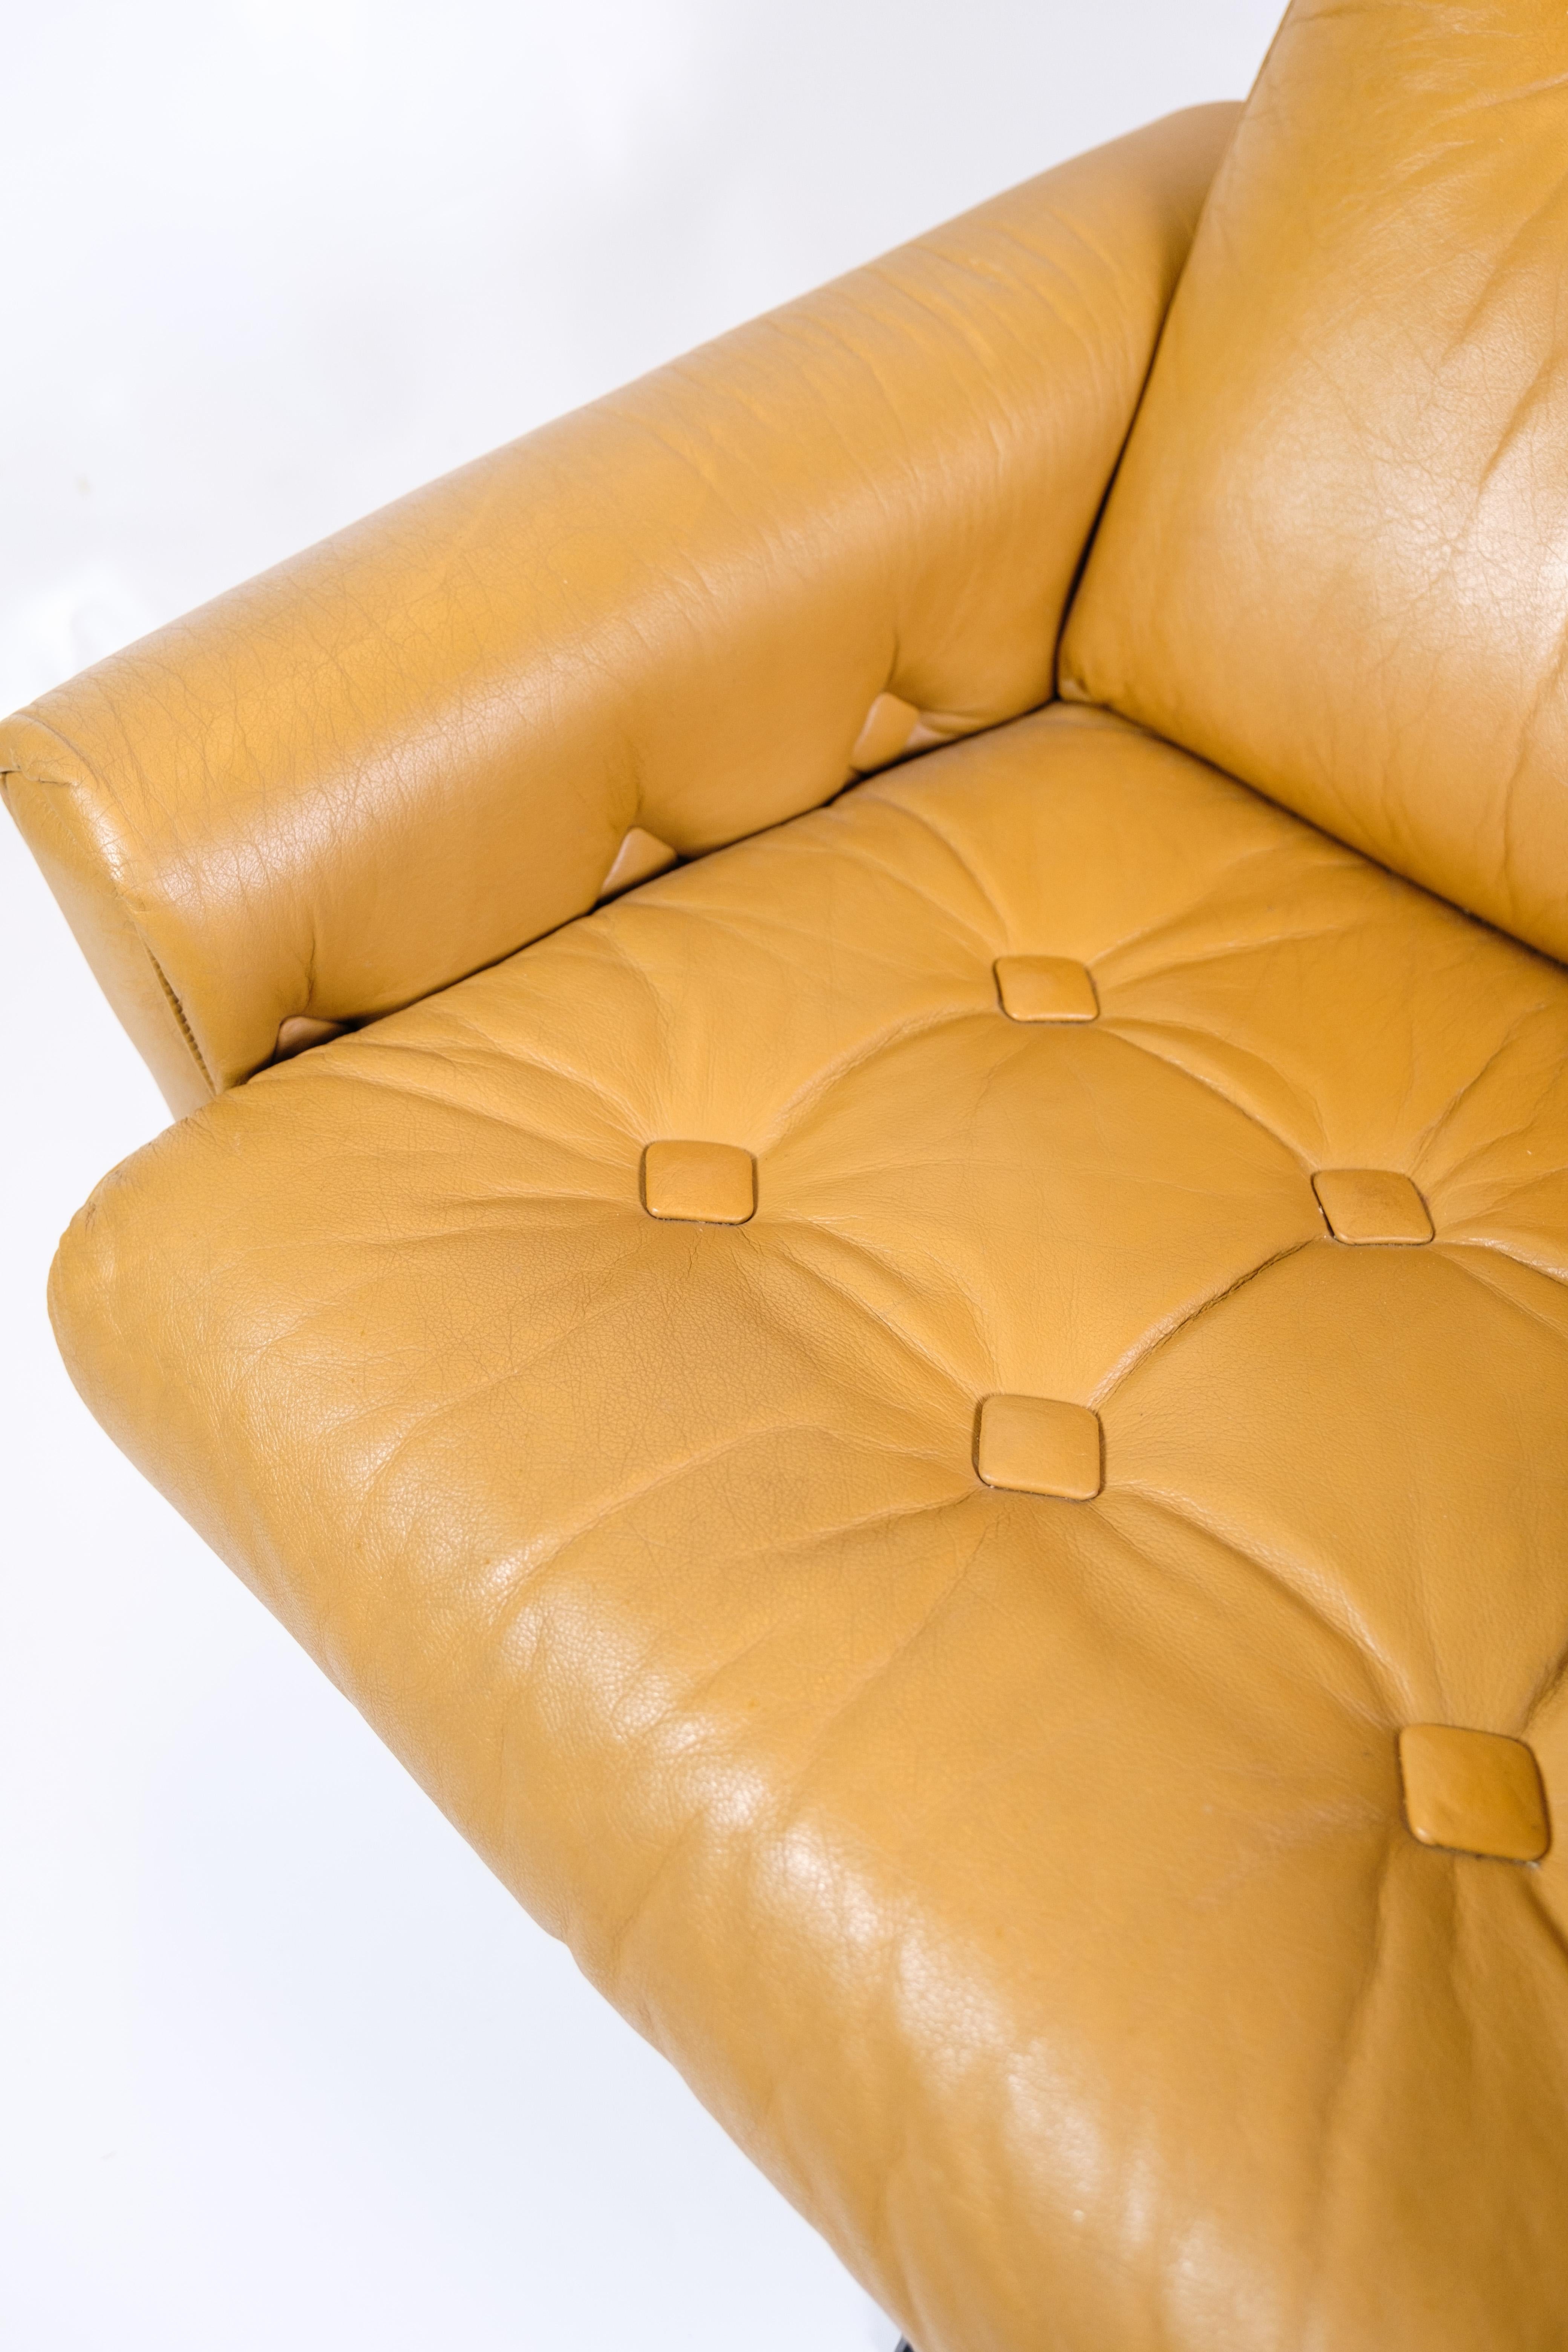 The armchair in brown leather, an example of Danish design from the 1980s, radiates both comfort and style. The deep, warm color of brown leather gives the chair a sophisticated look, while the soft leather adds a luxurious feel to any decor.

This